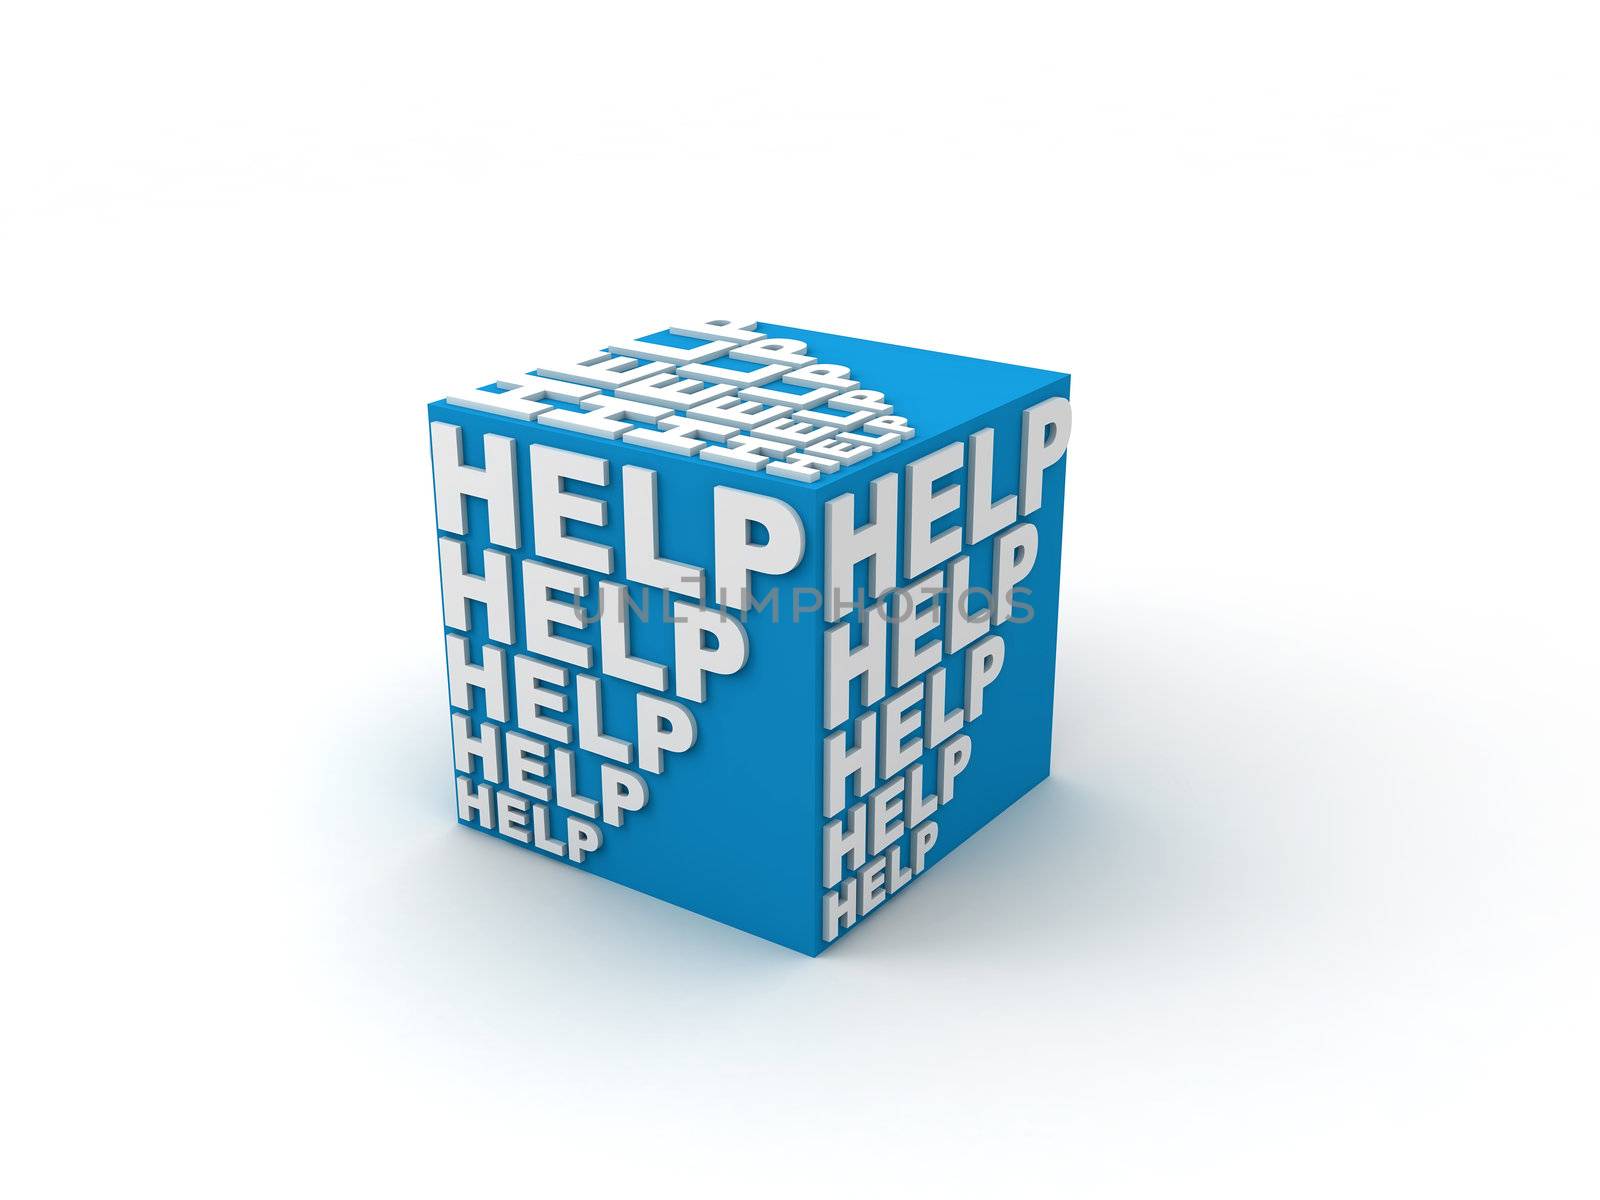 3d cubes with word "HELP" by aleksan